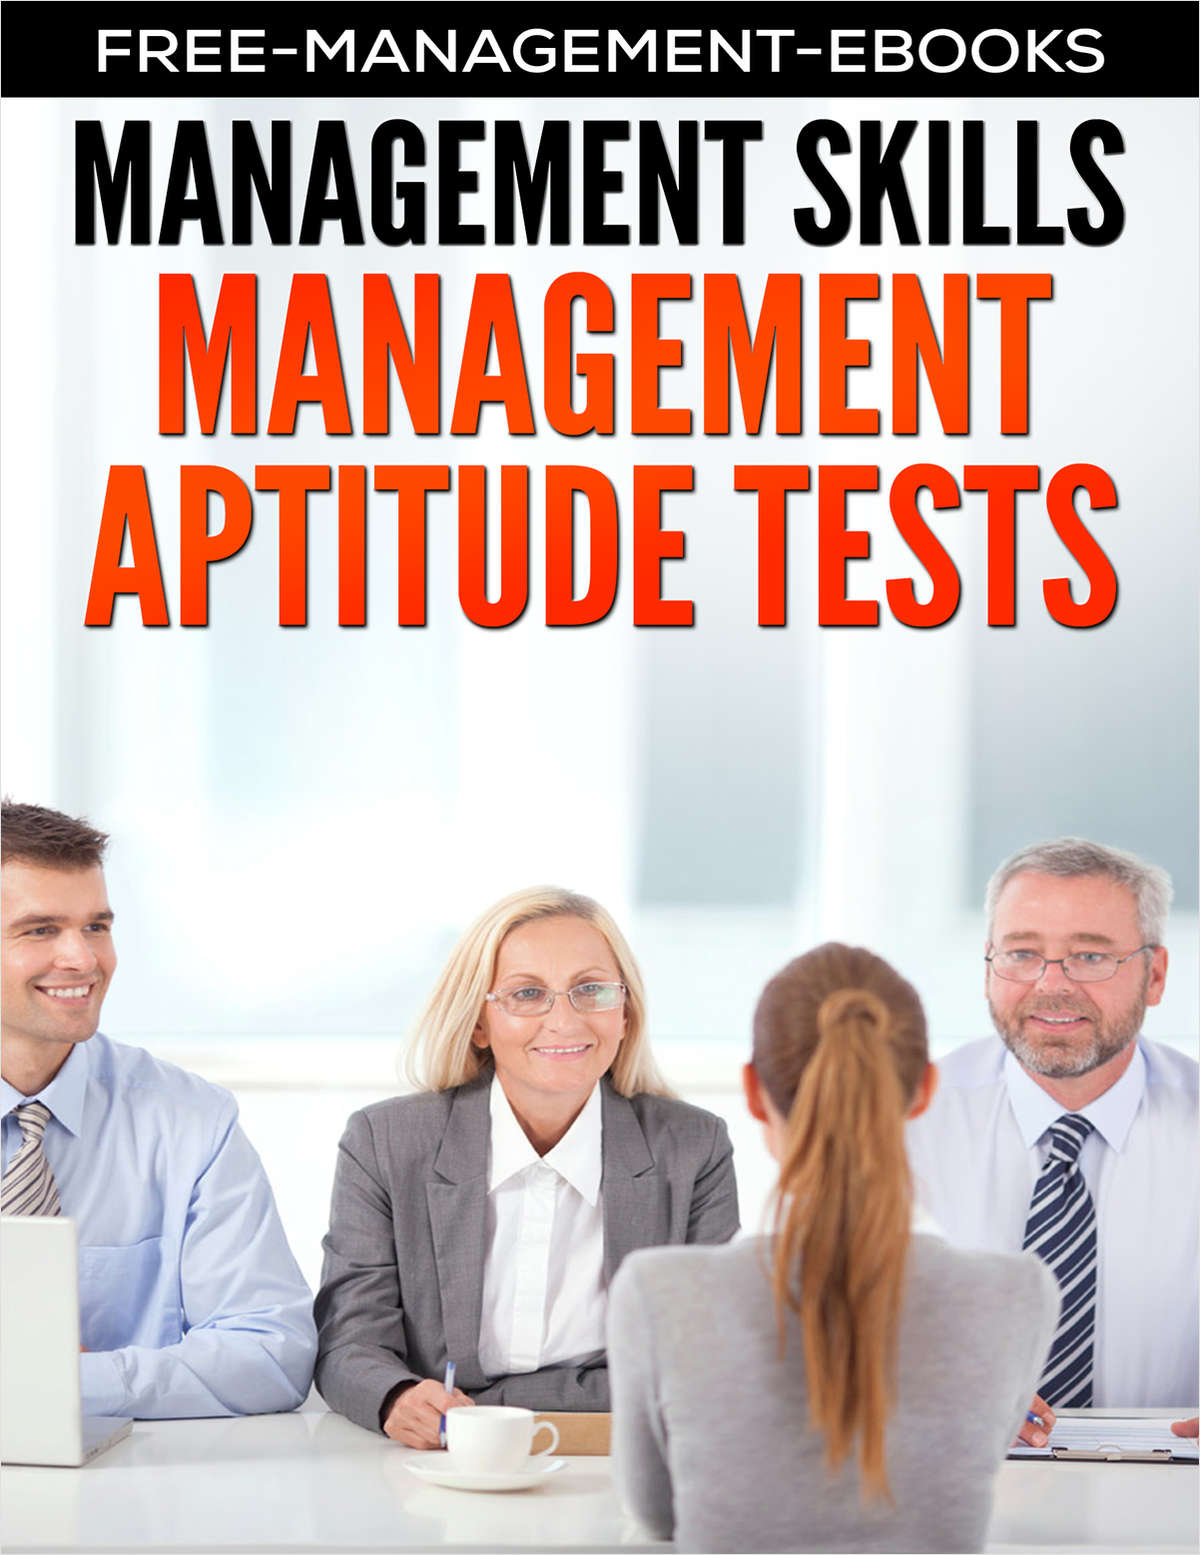 Management Aptitude Tests Developing Your Management Skills Free Free Management Ebooks EBook